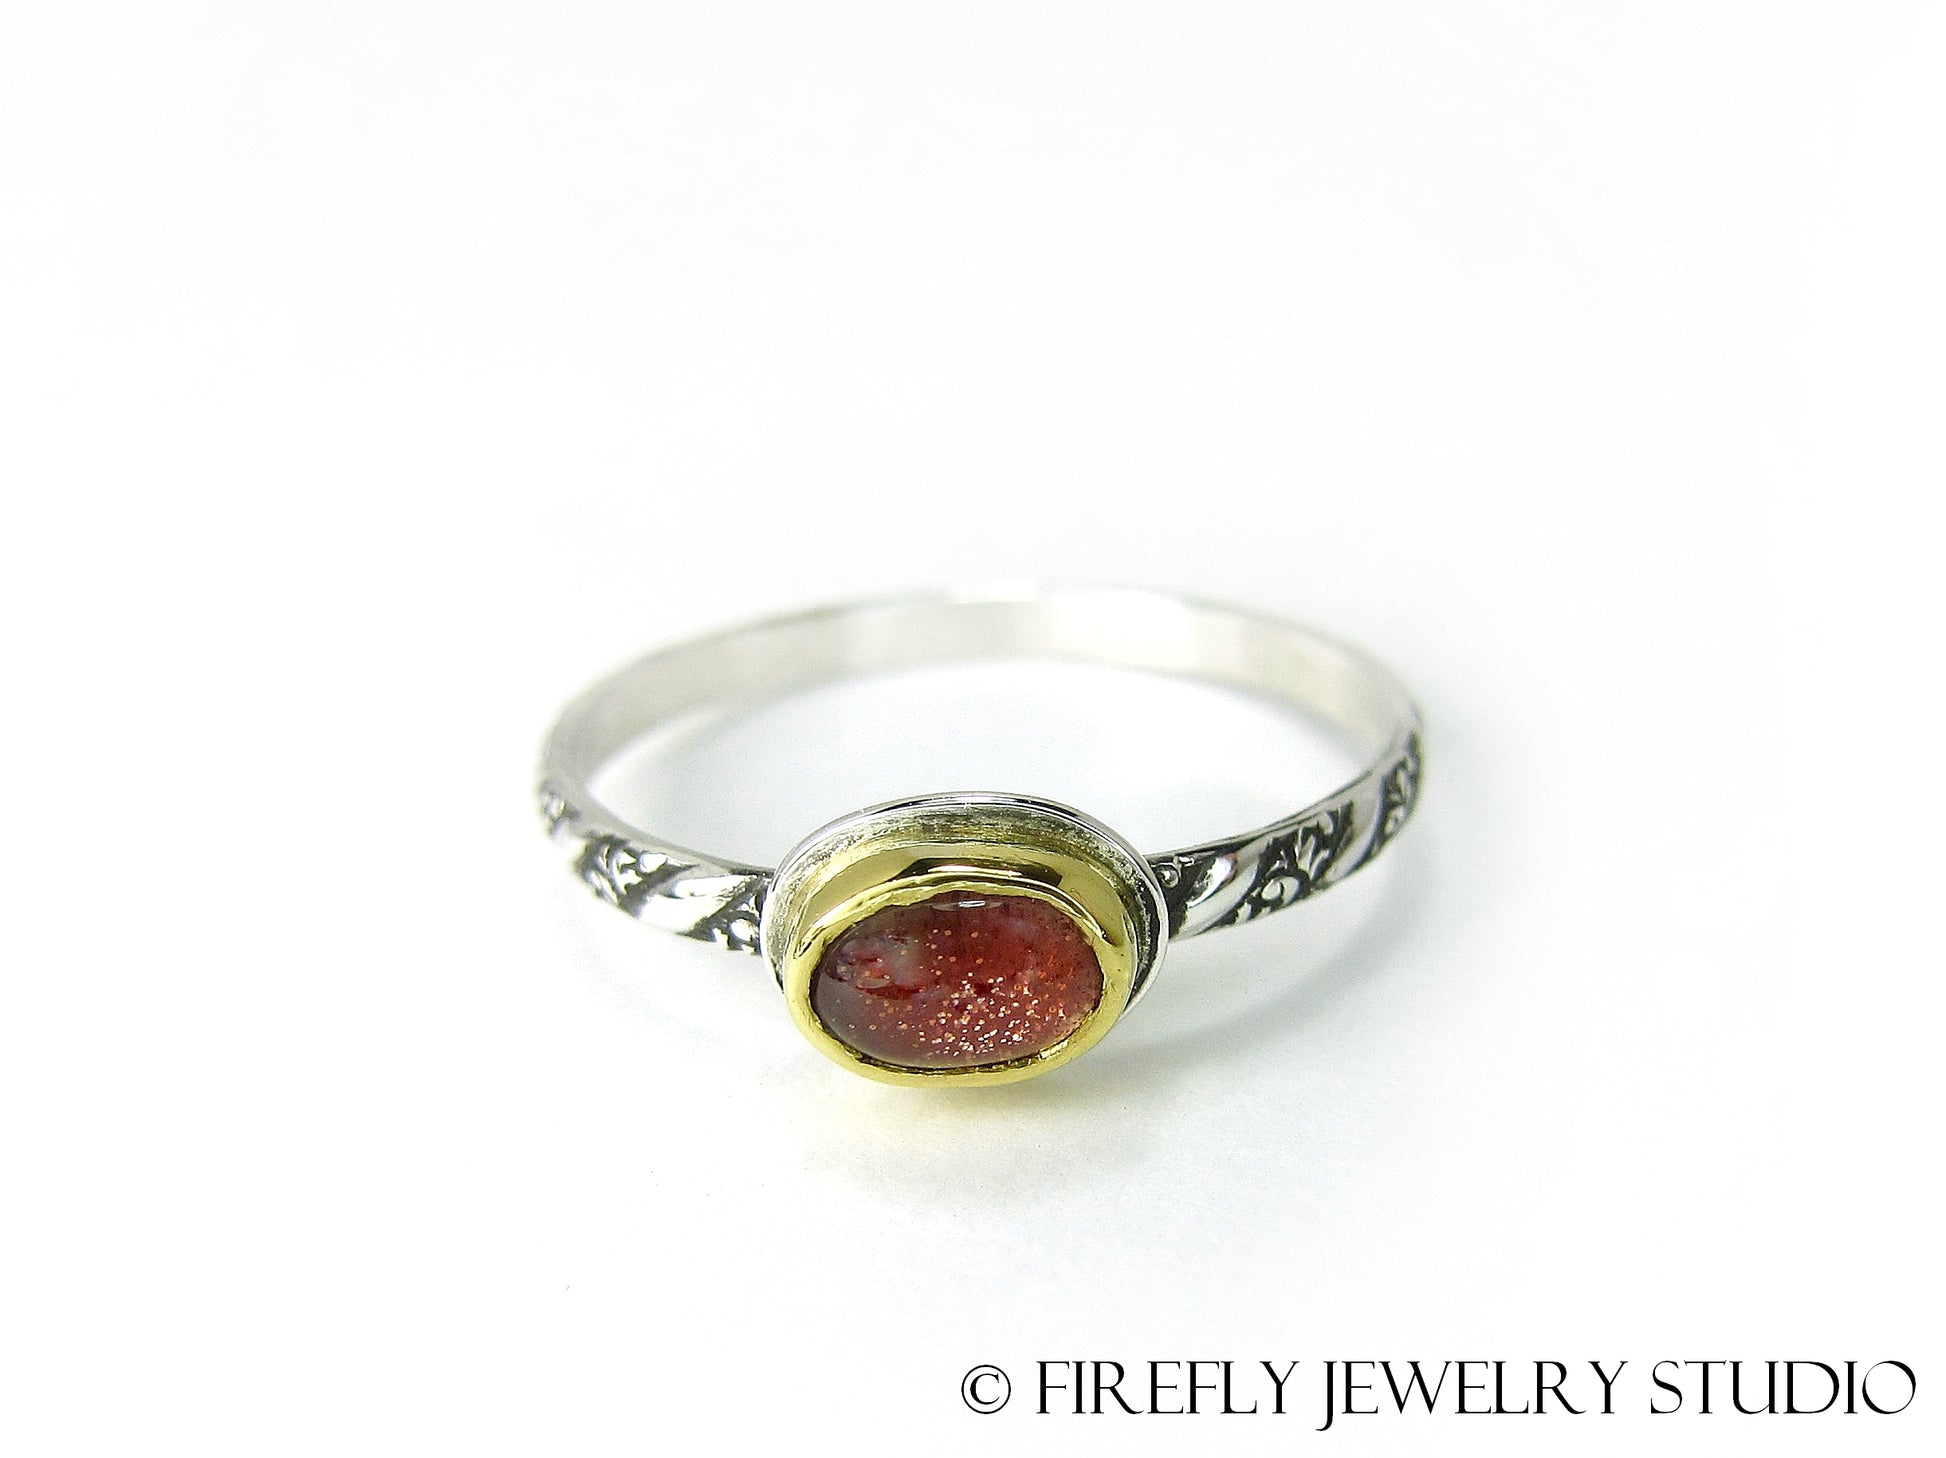 Dainty Sunstone Solitaire Stacking Ring in 24k Gold and Sterling Silver. Size 8.25 - Firefly Jewelry Studio